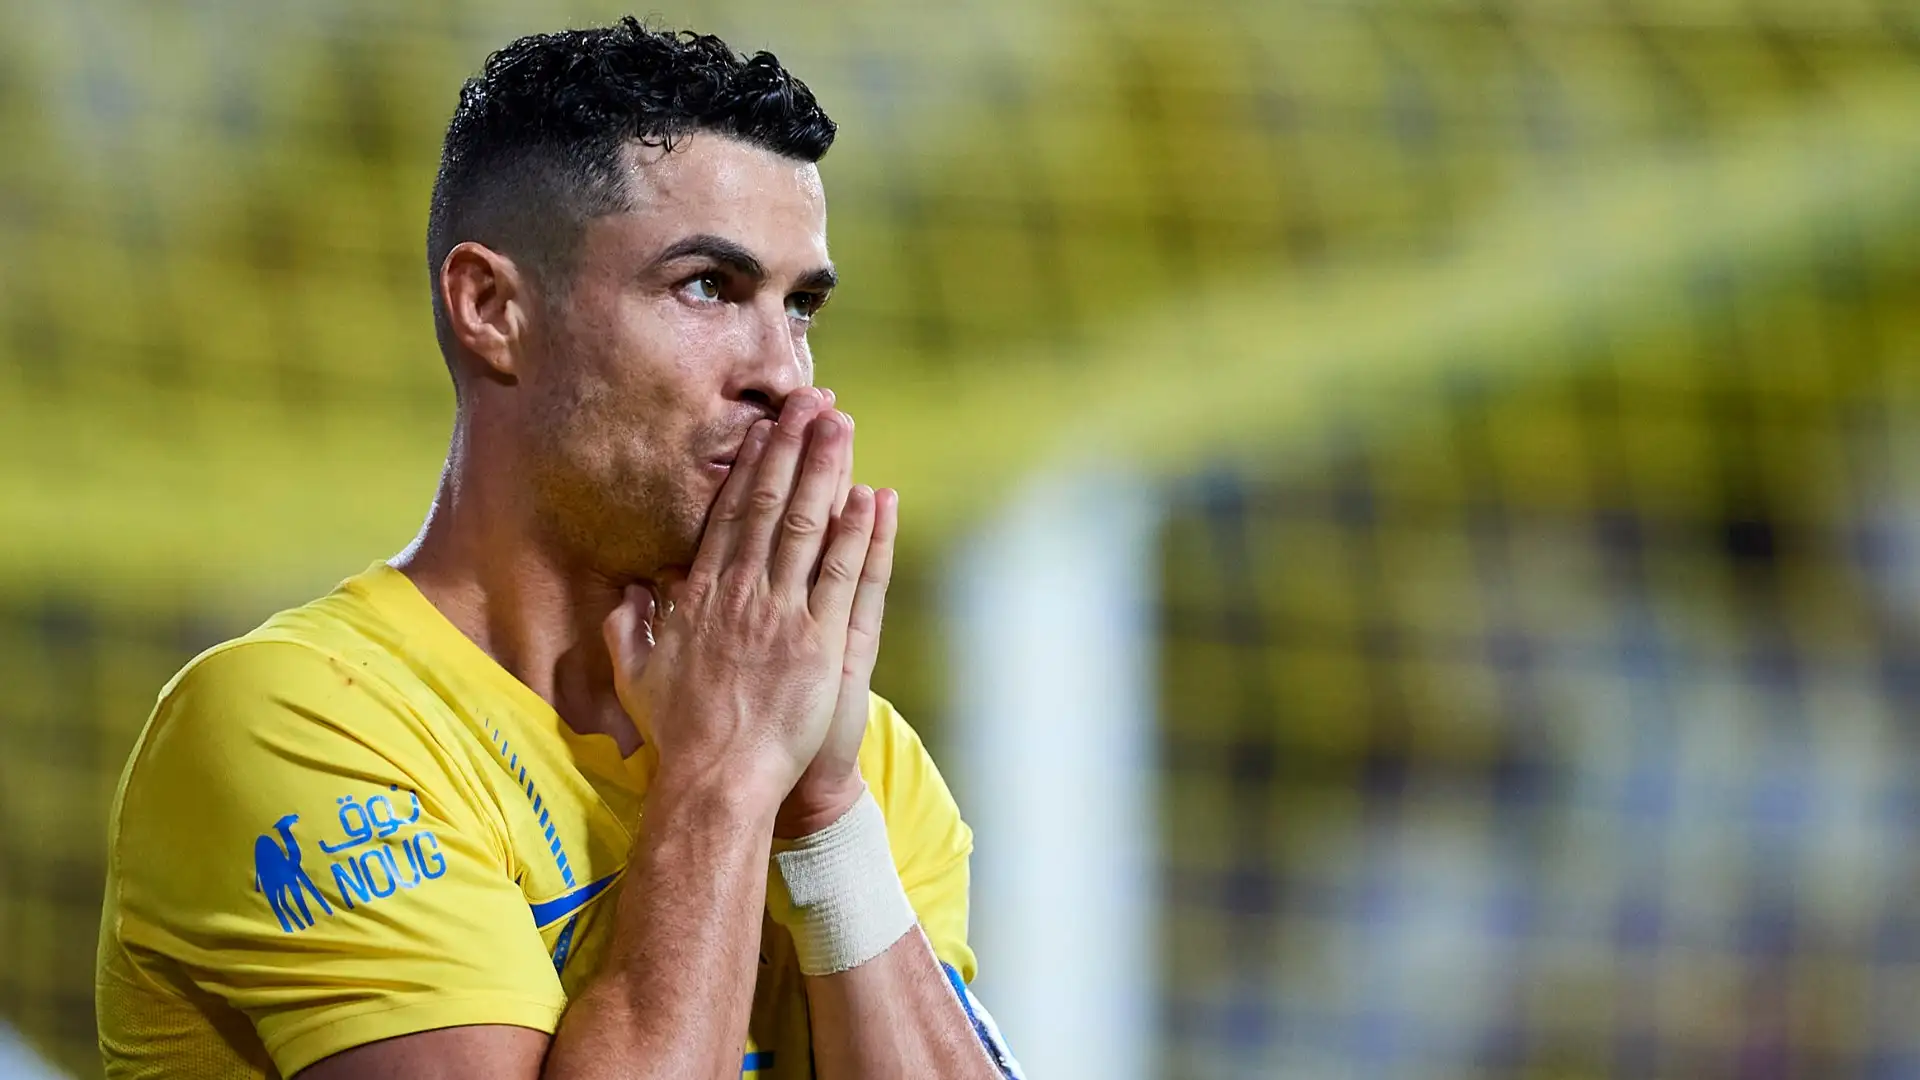 Will Cristiano Ronaldo play for Al-Nassr next season? Huge future call made on Portuguese superstar in ‘blood has turned yellow’ claim